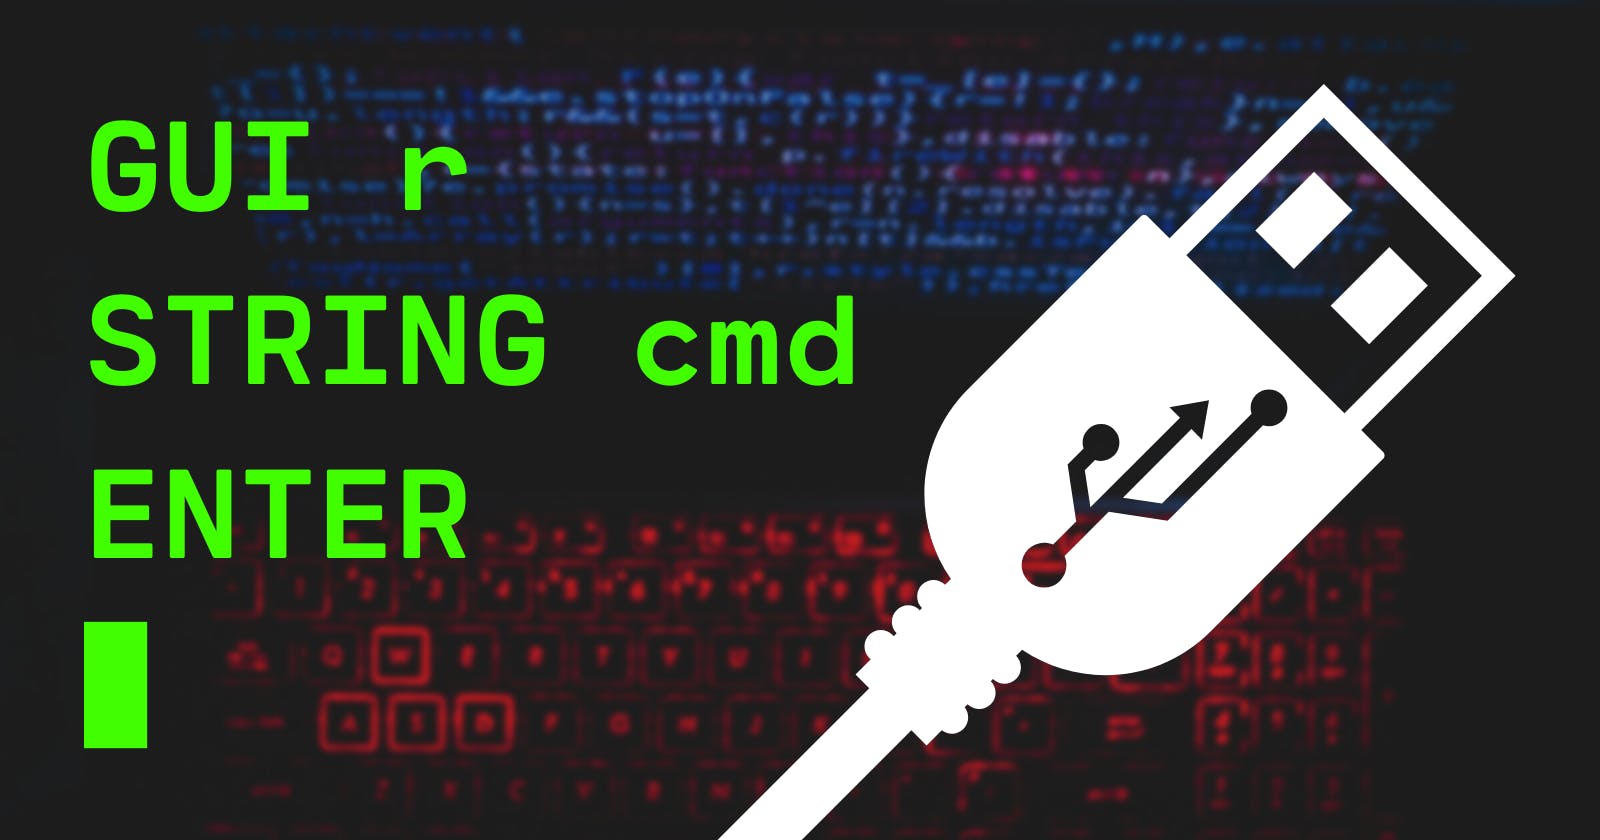 My BadUSB Hacking online course